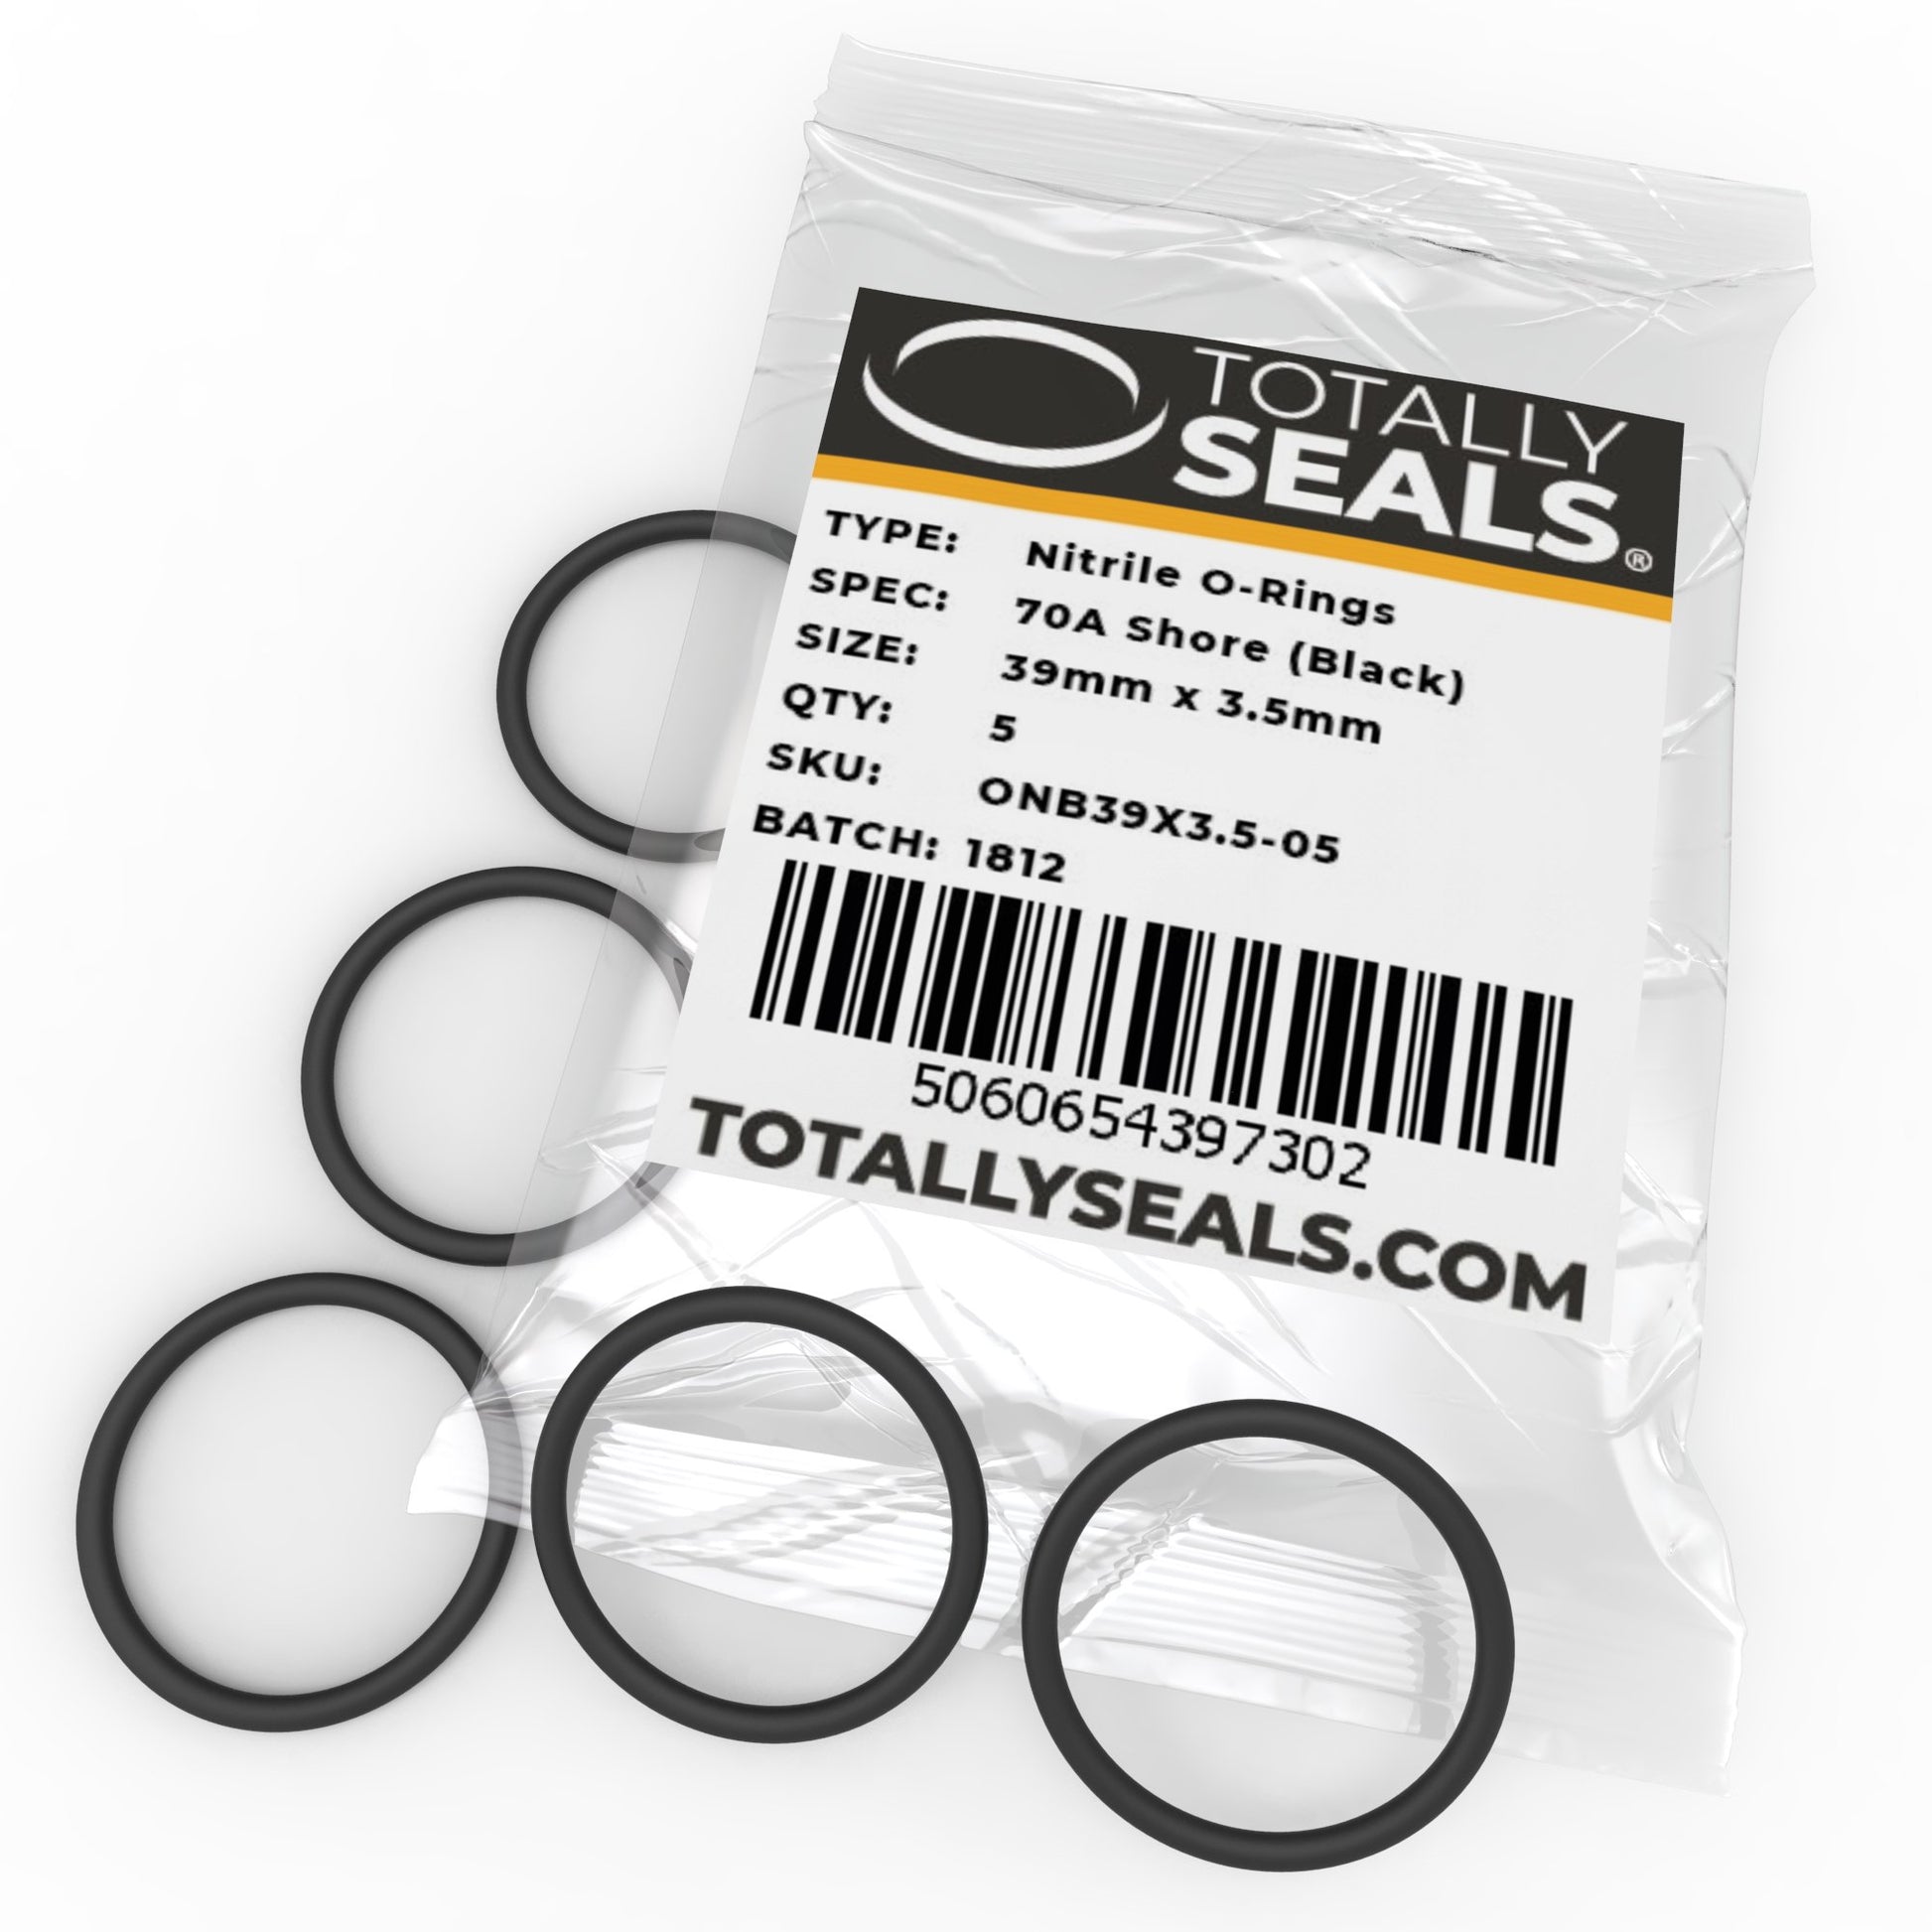 39mm x 3.5mm (46mm OD) Nitrile O-Rings - Totally Seals®